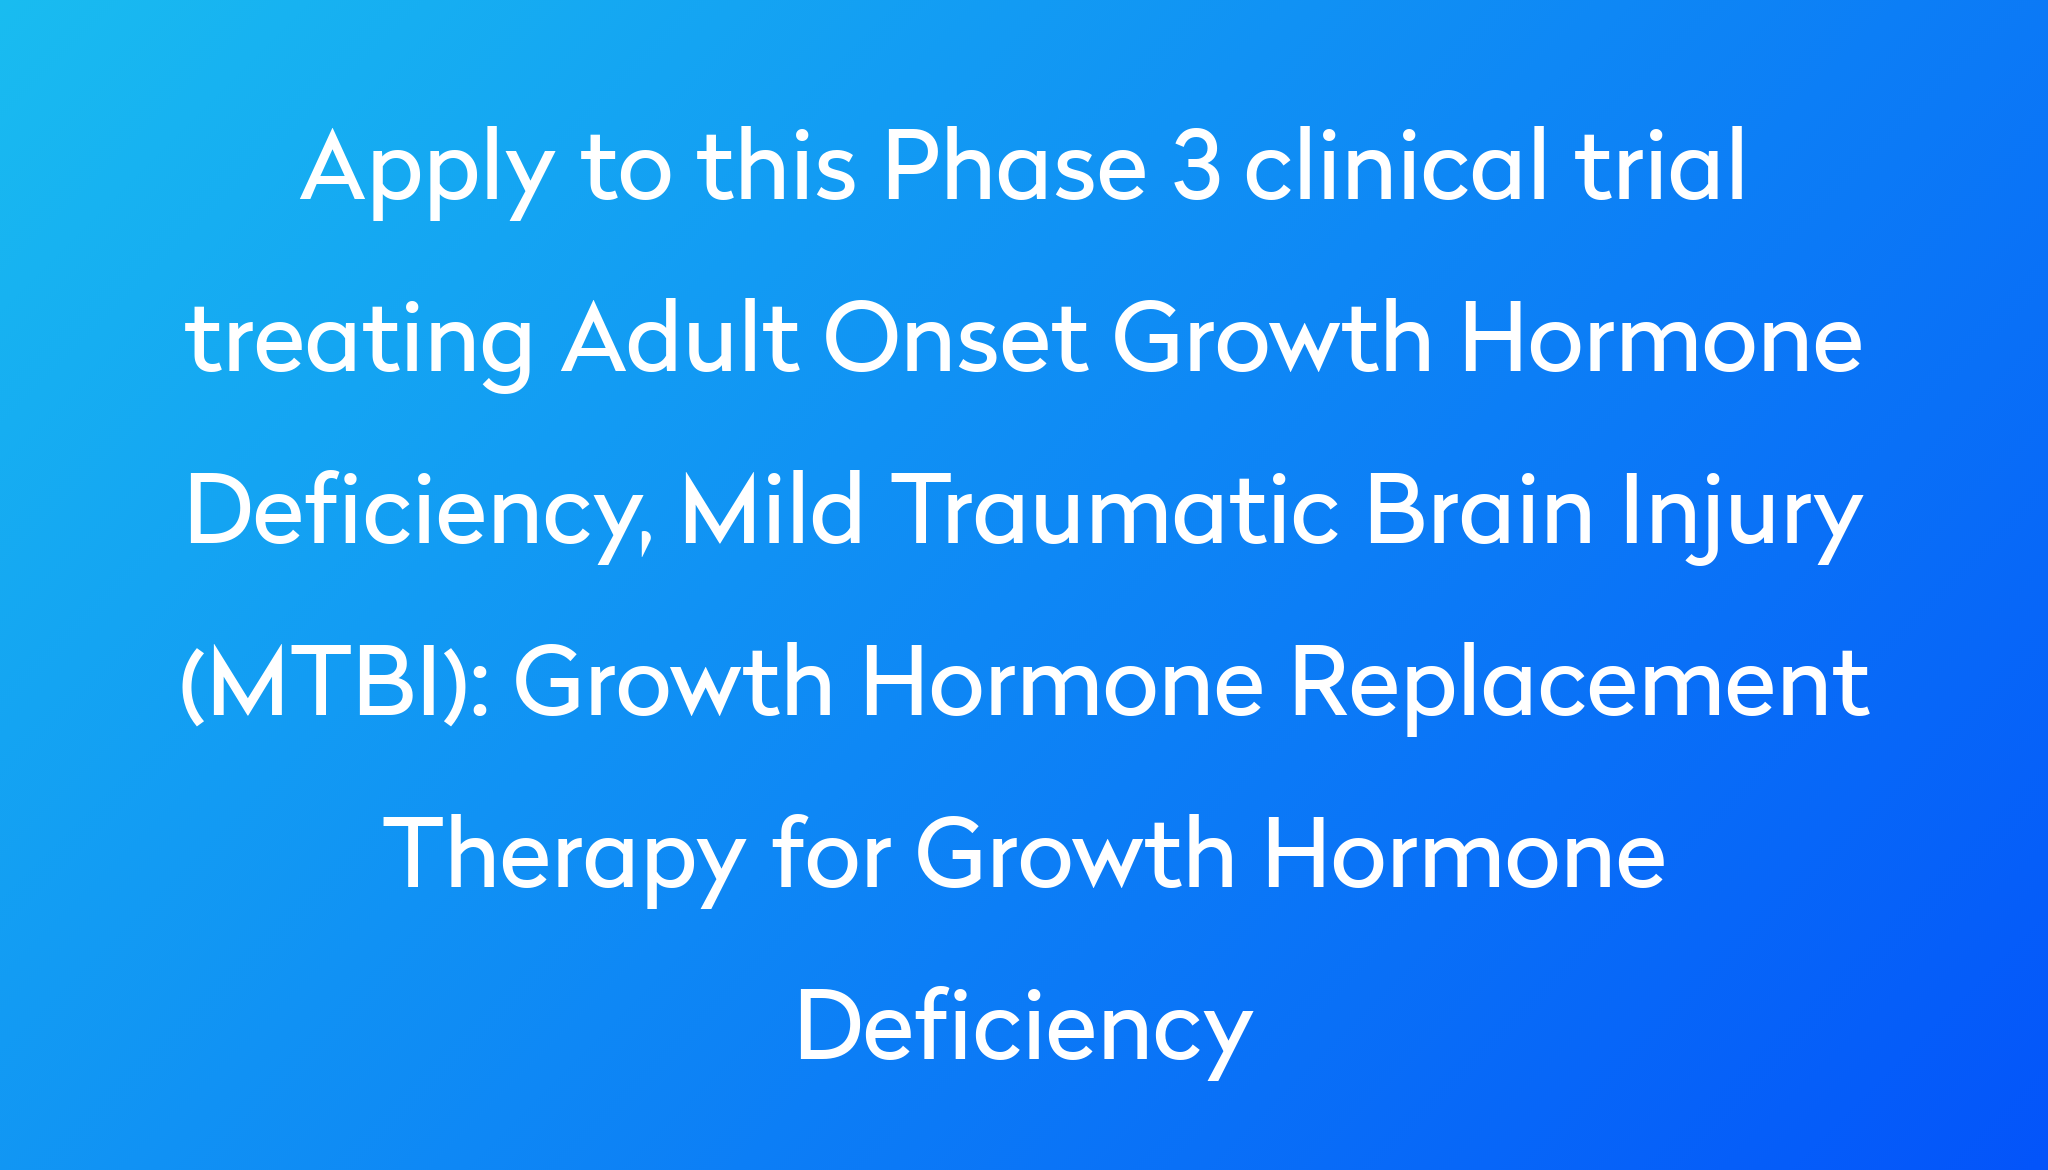 Growth Hormone Replacement Therapy For Growth Hormone Deficiency